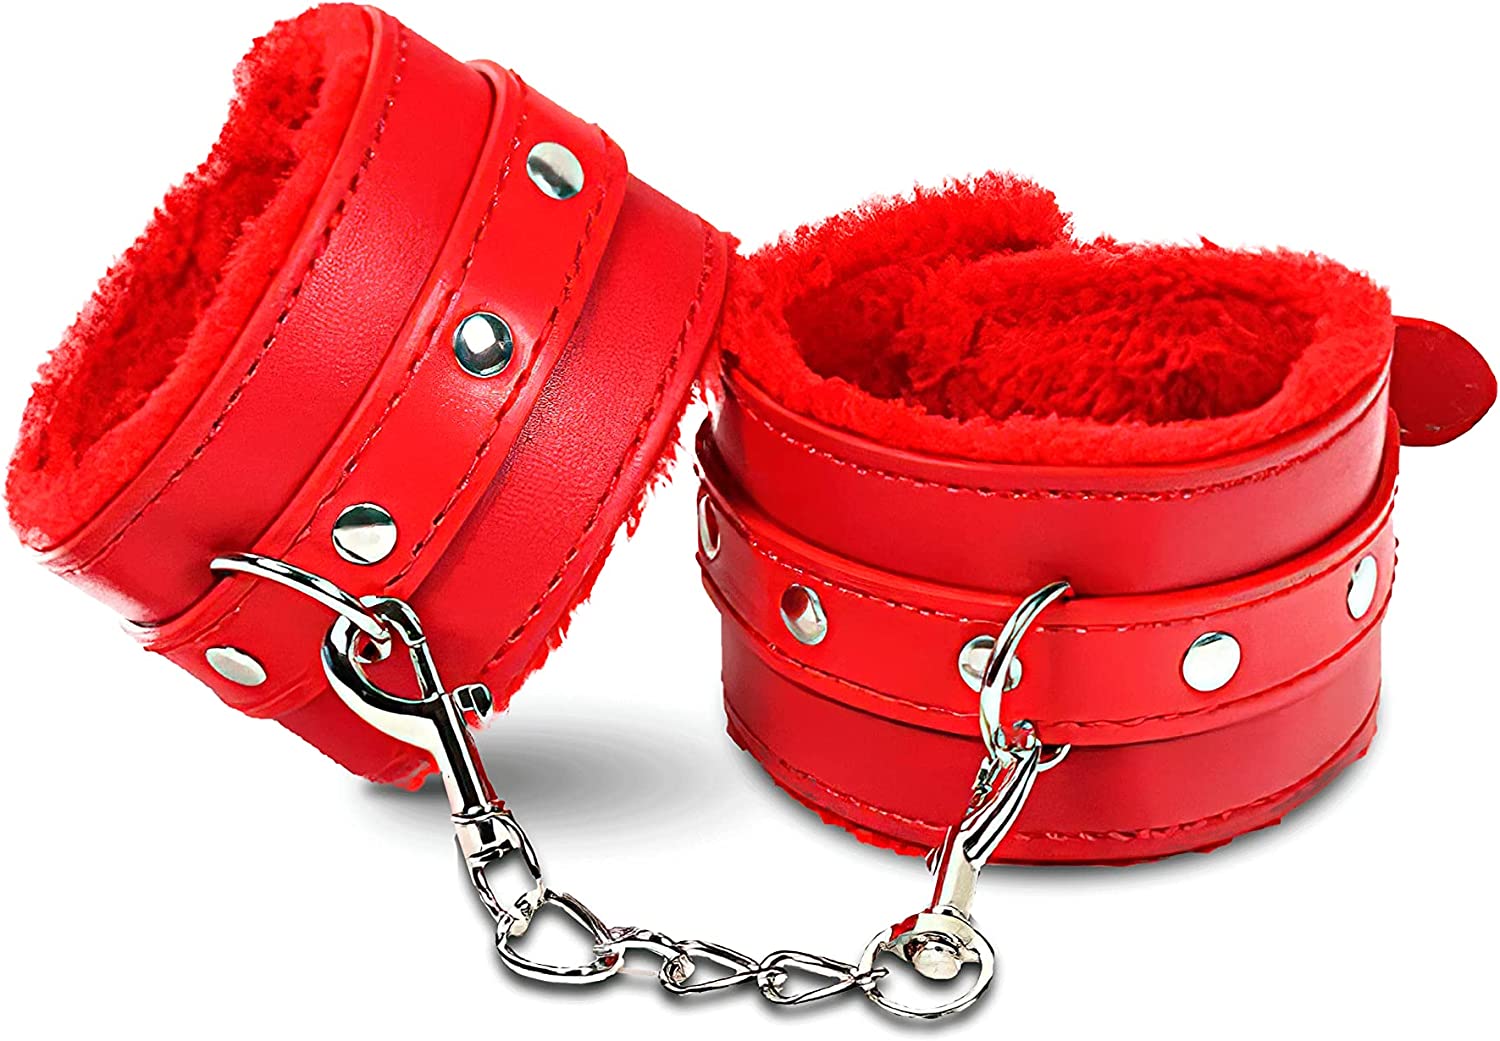 718i9a1igHL. AC SL1500 Fluffy Handcuffs Bracelet Party Cosplay Adults Sex Game